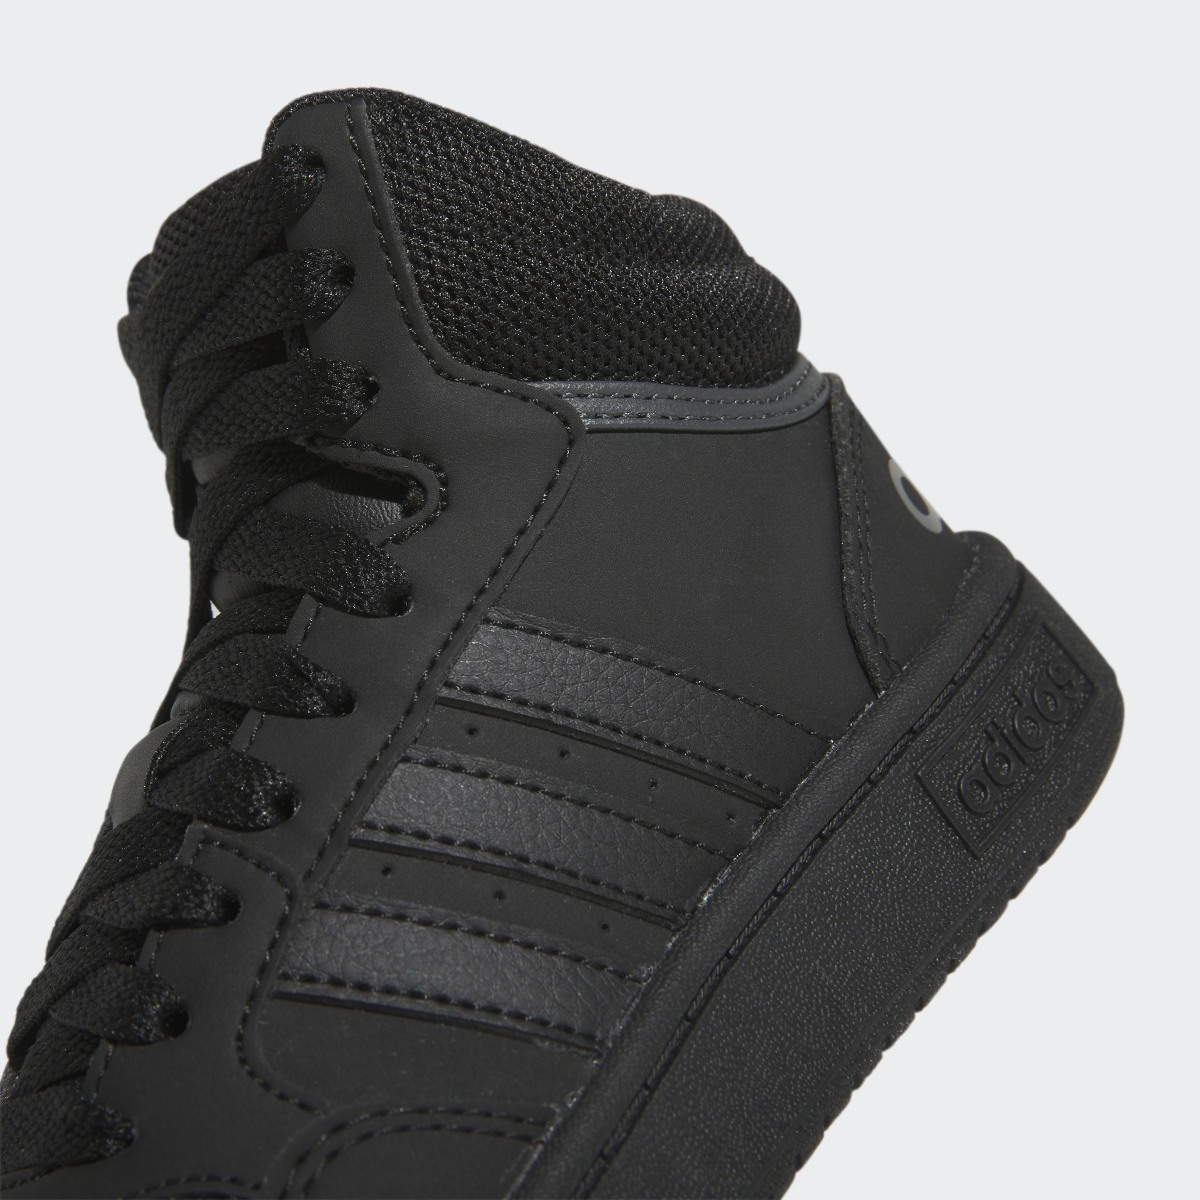 Adidas Hoops Mid Shoes. 9